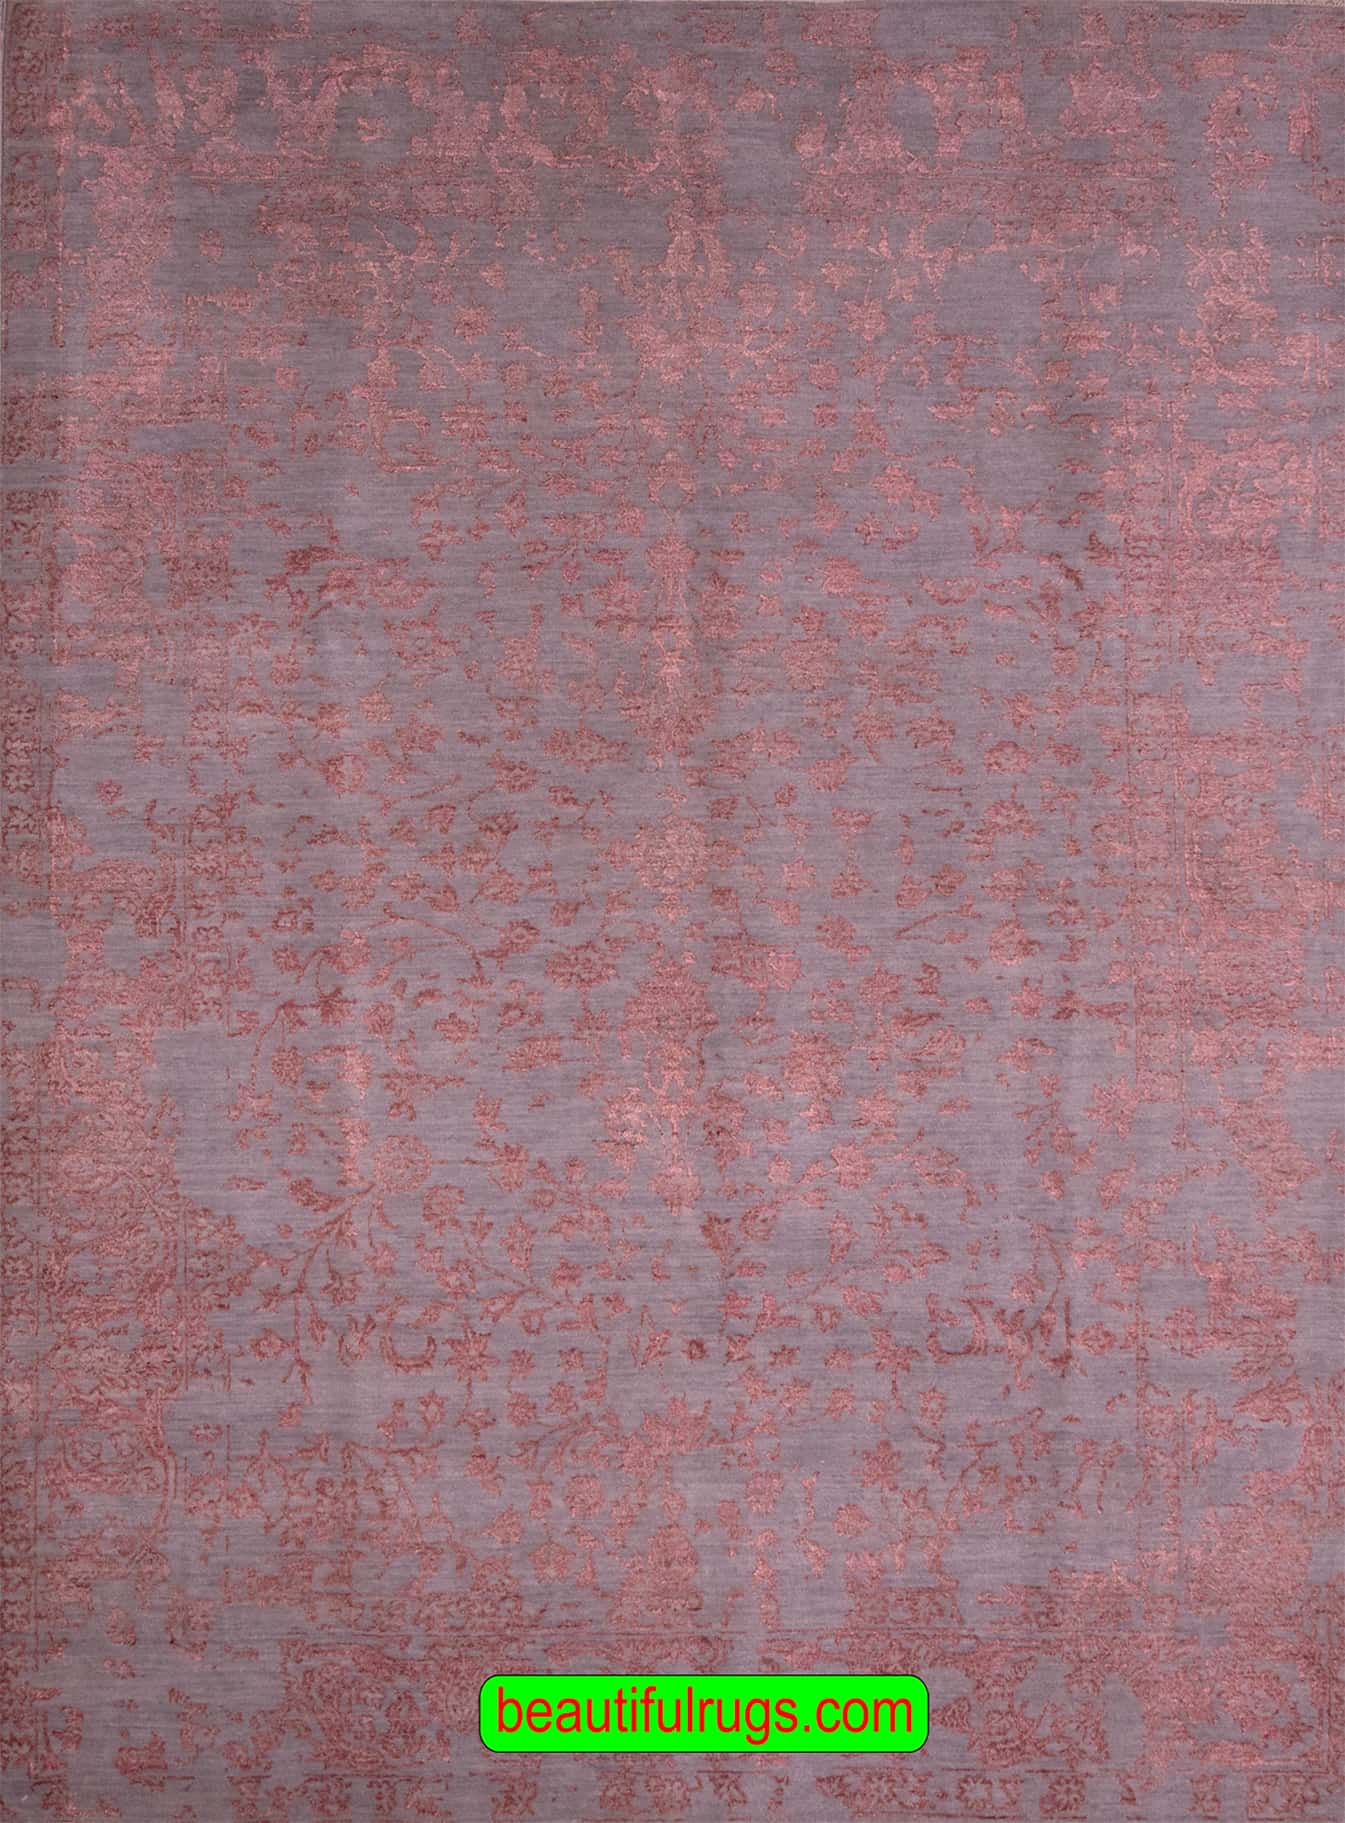 Modern Rug for Living Room, Gray and Pink Rug, size 6.3x9, main image